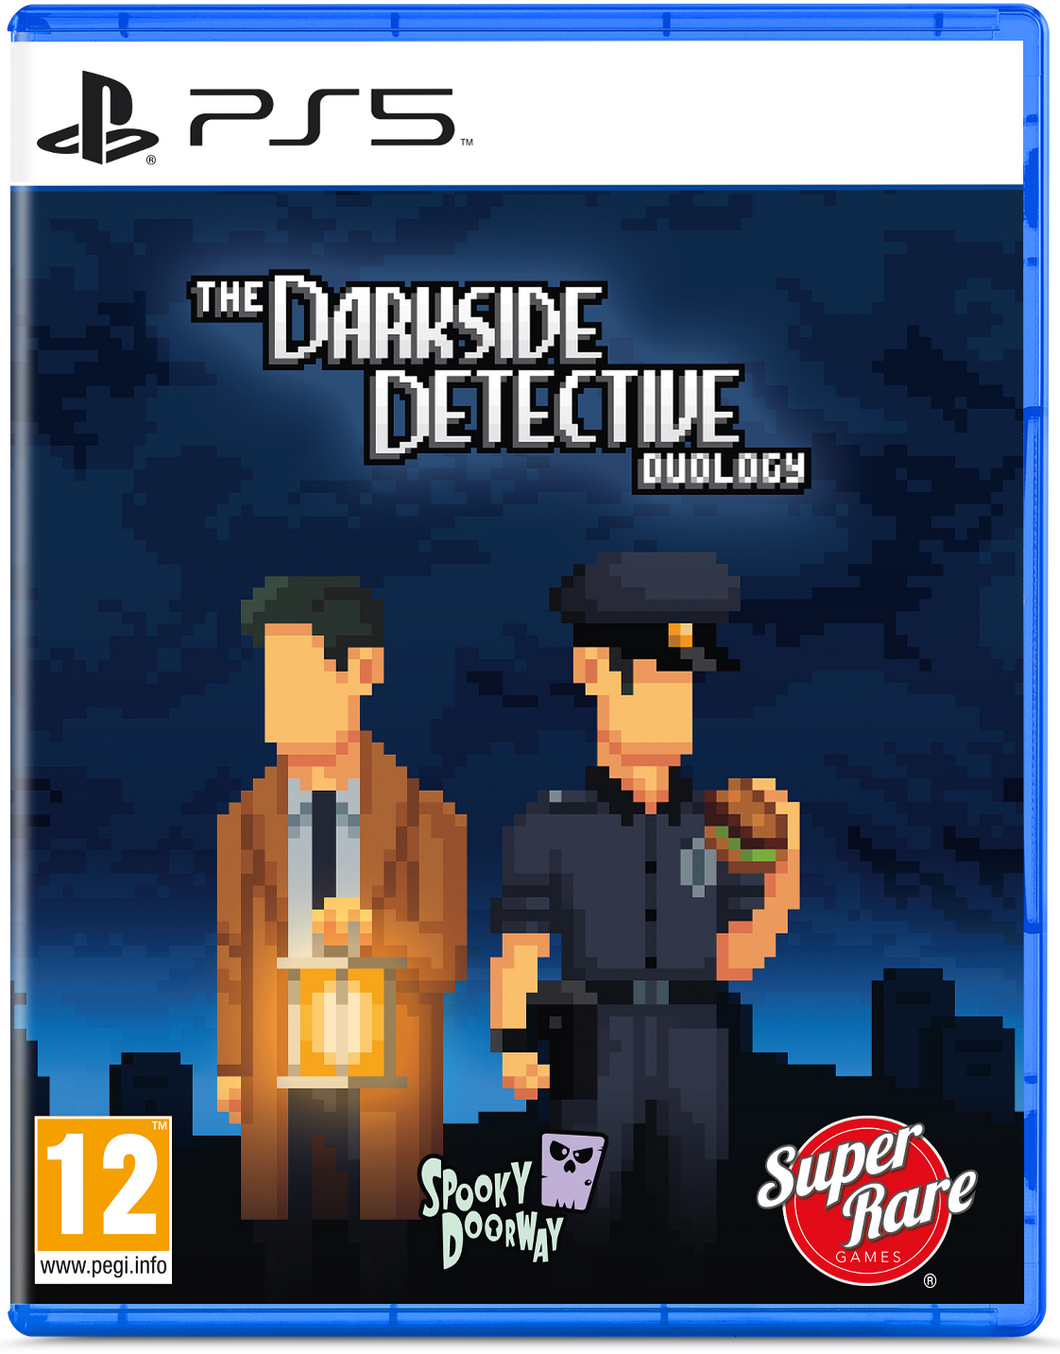 The darkside detective Duology / Super rare games / PS5 / 1000 copies